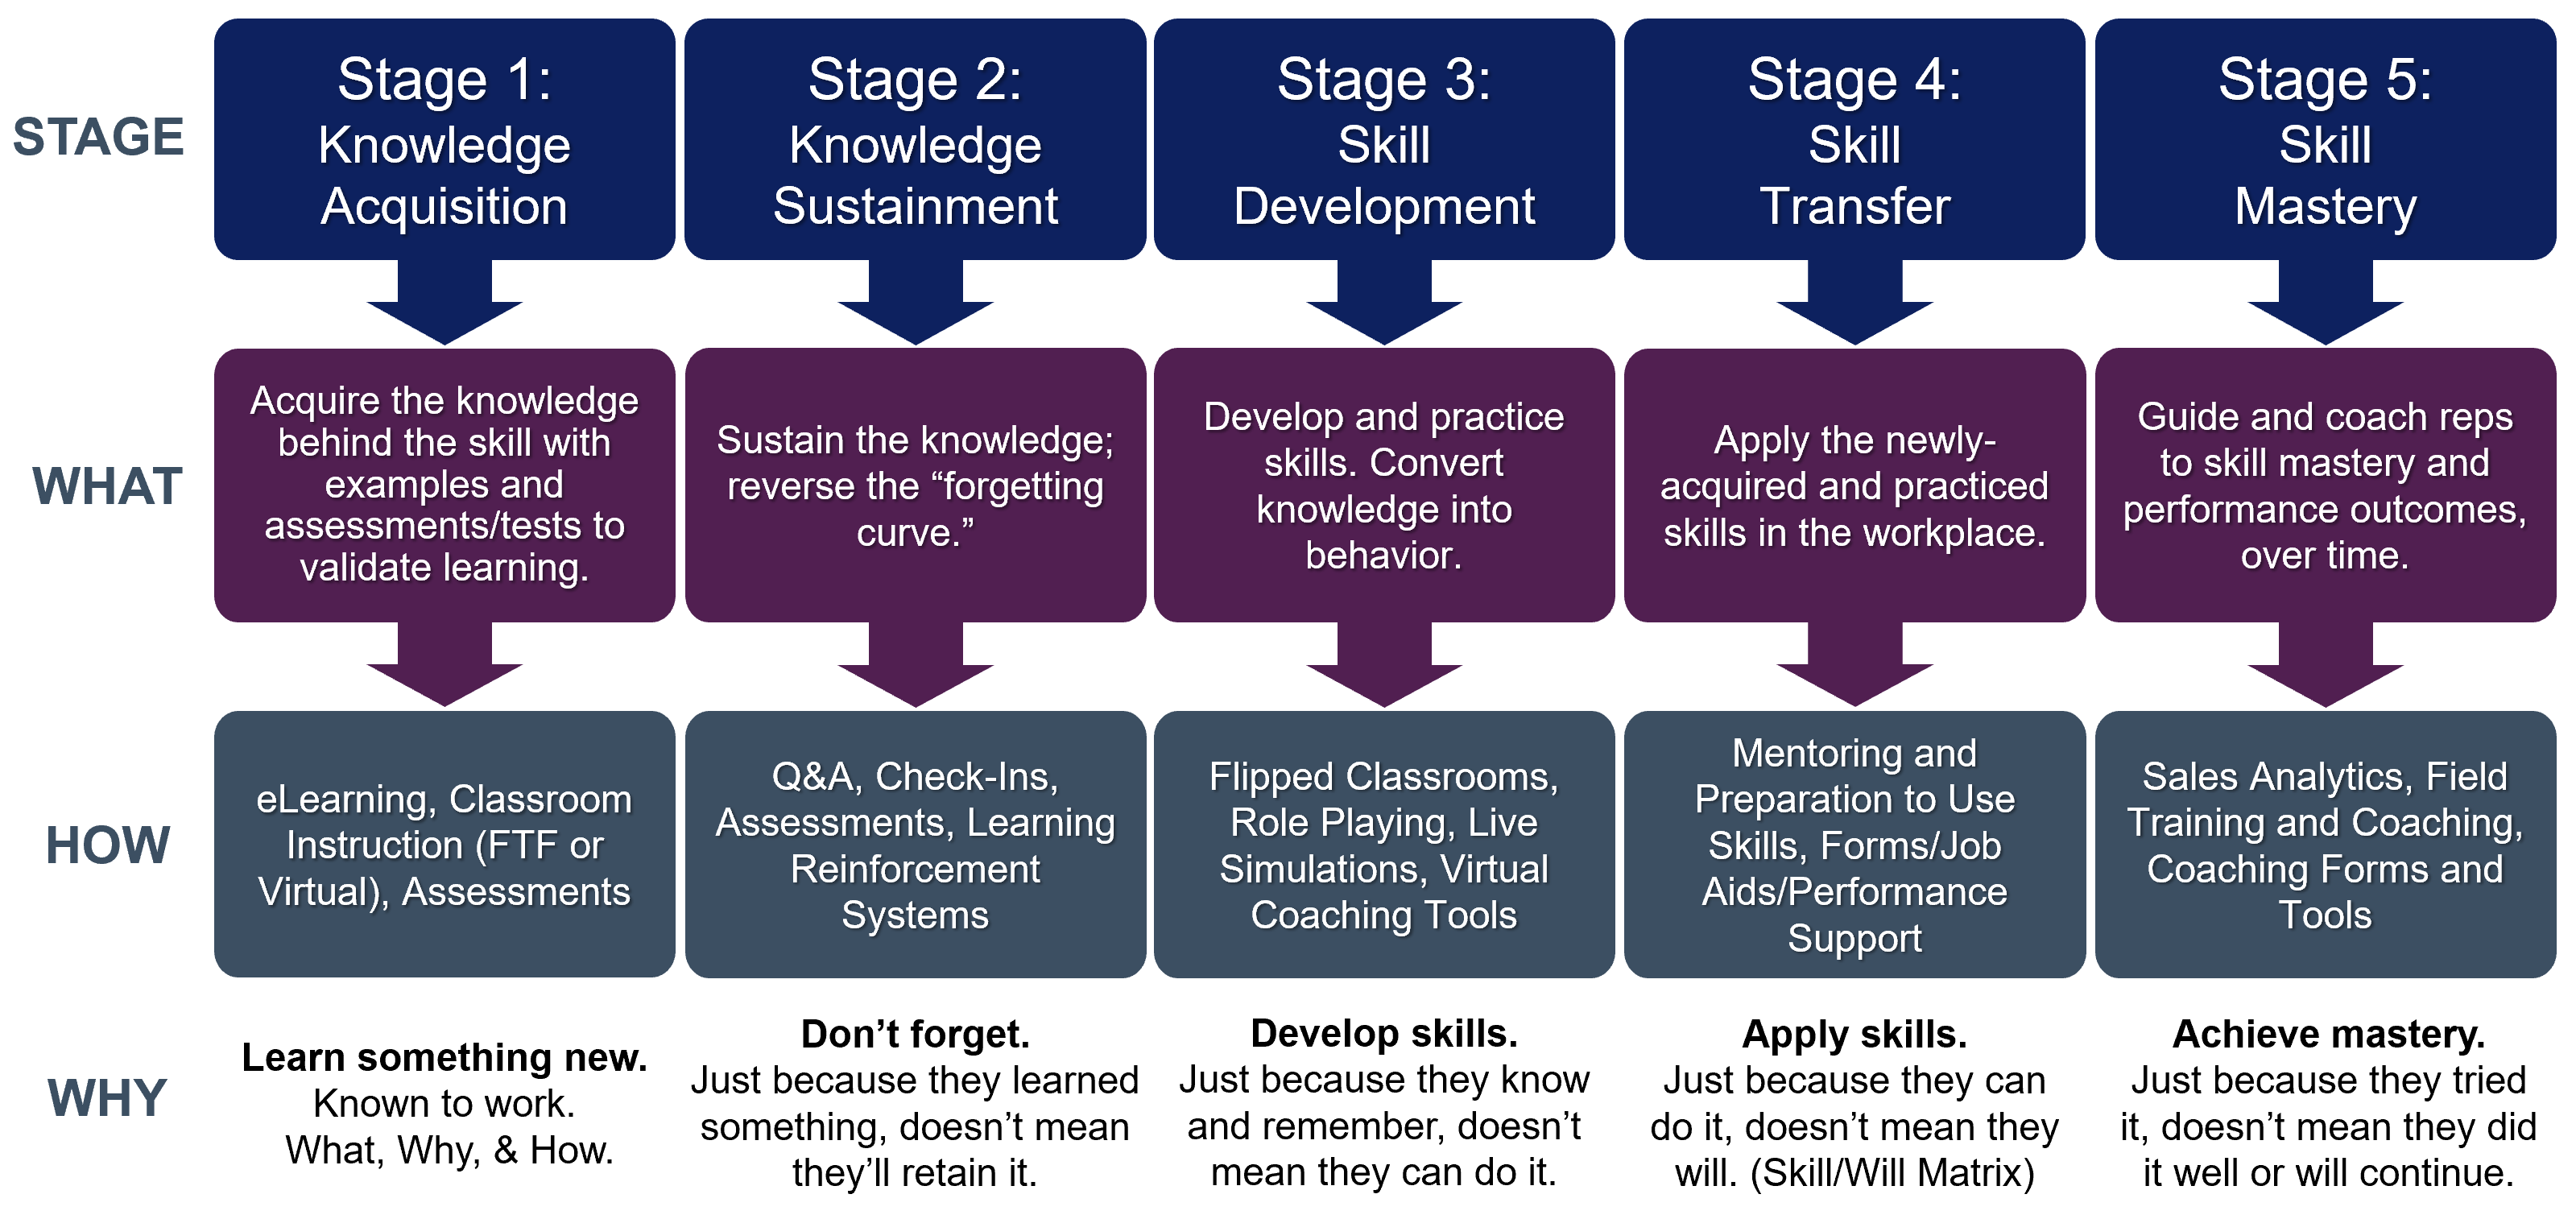 5 Stages of Sales Mastery and Behavior Change.